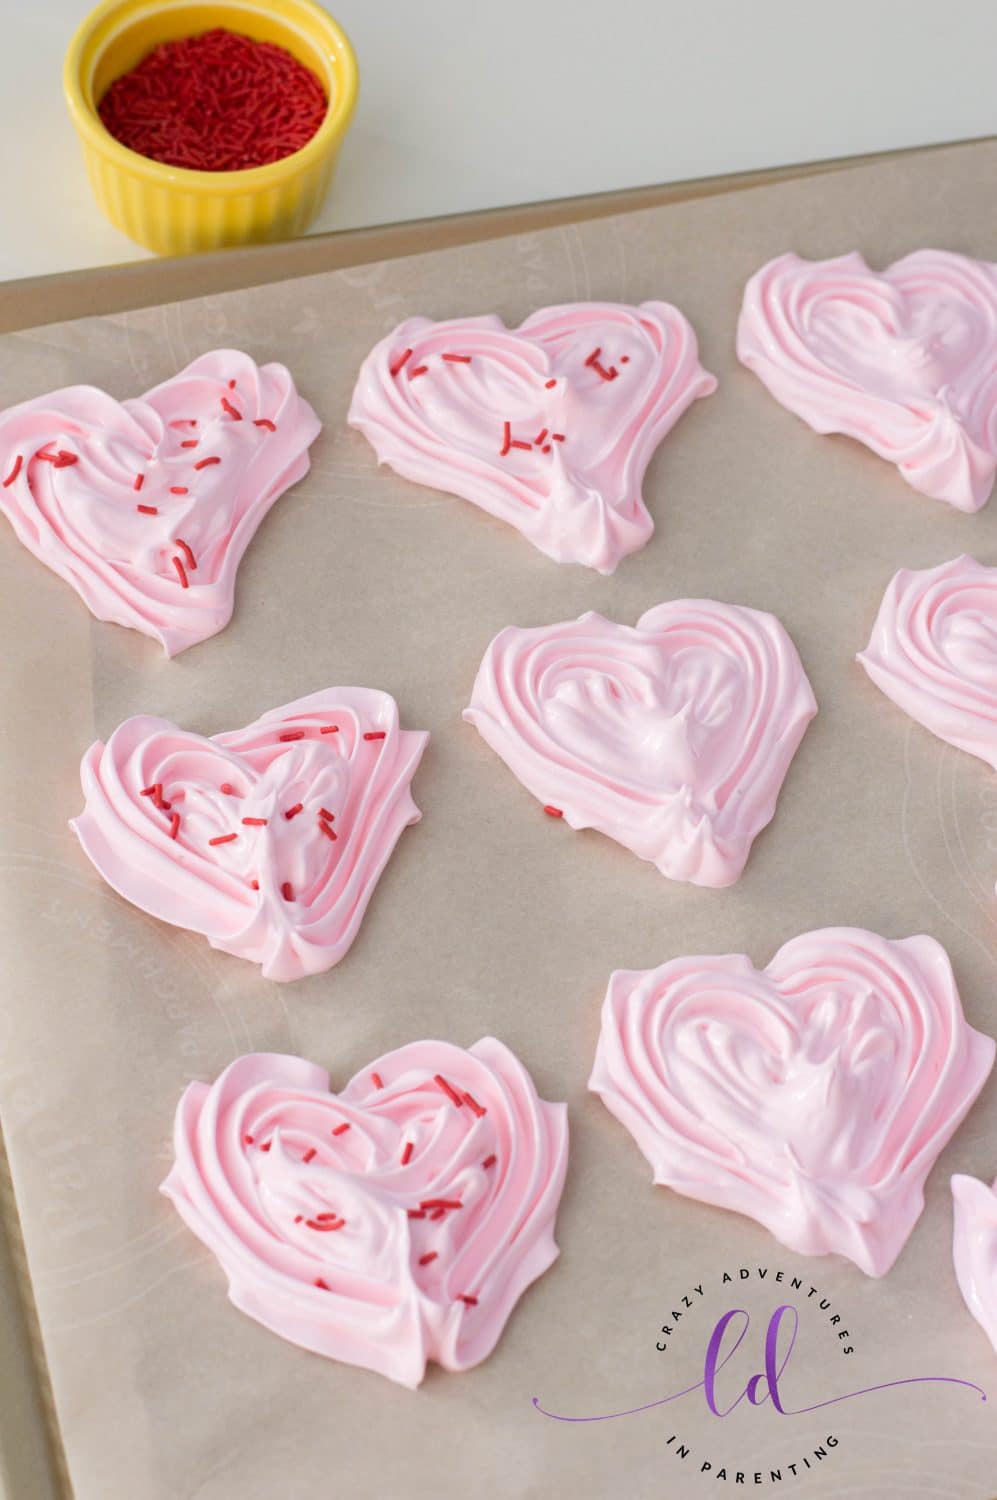 Fill and Decorate Heart Meringues